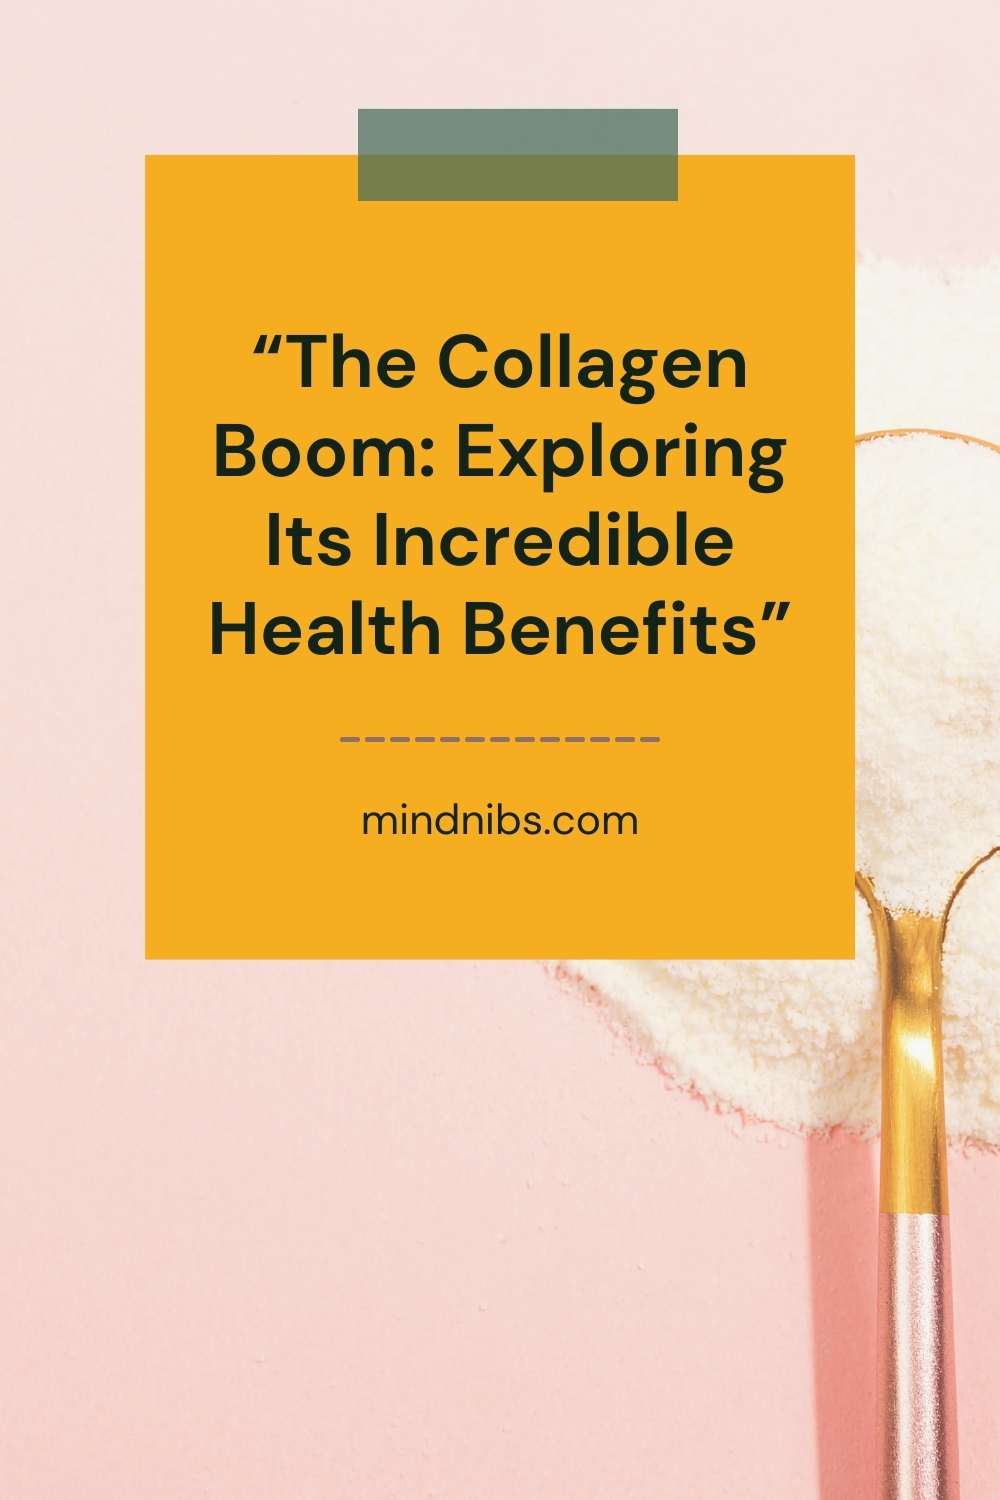 "The Collagen Boom: Exploring Its Incredible Health Benefits"